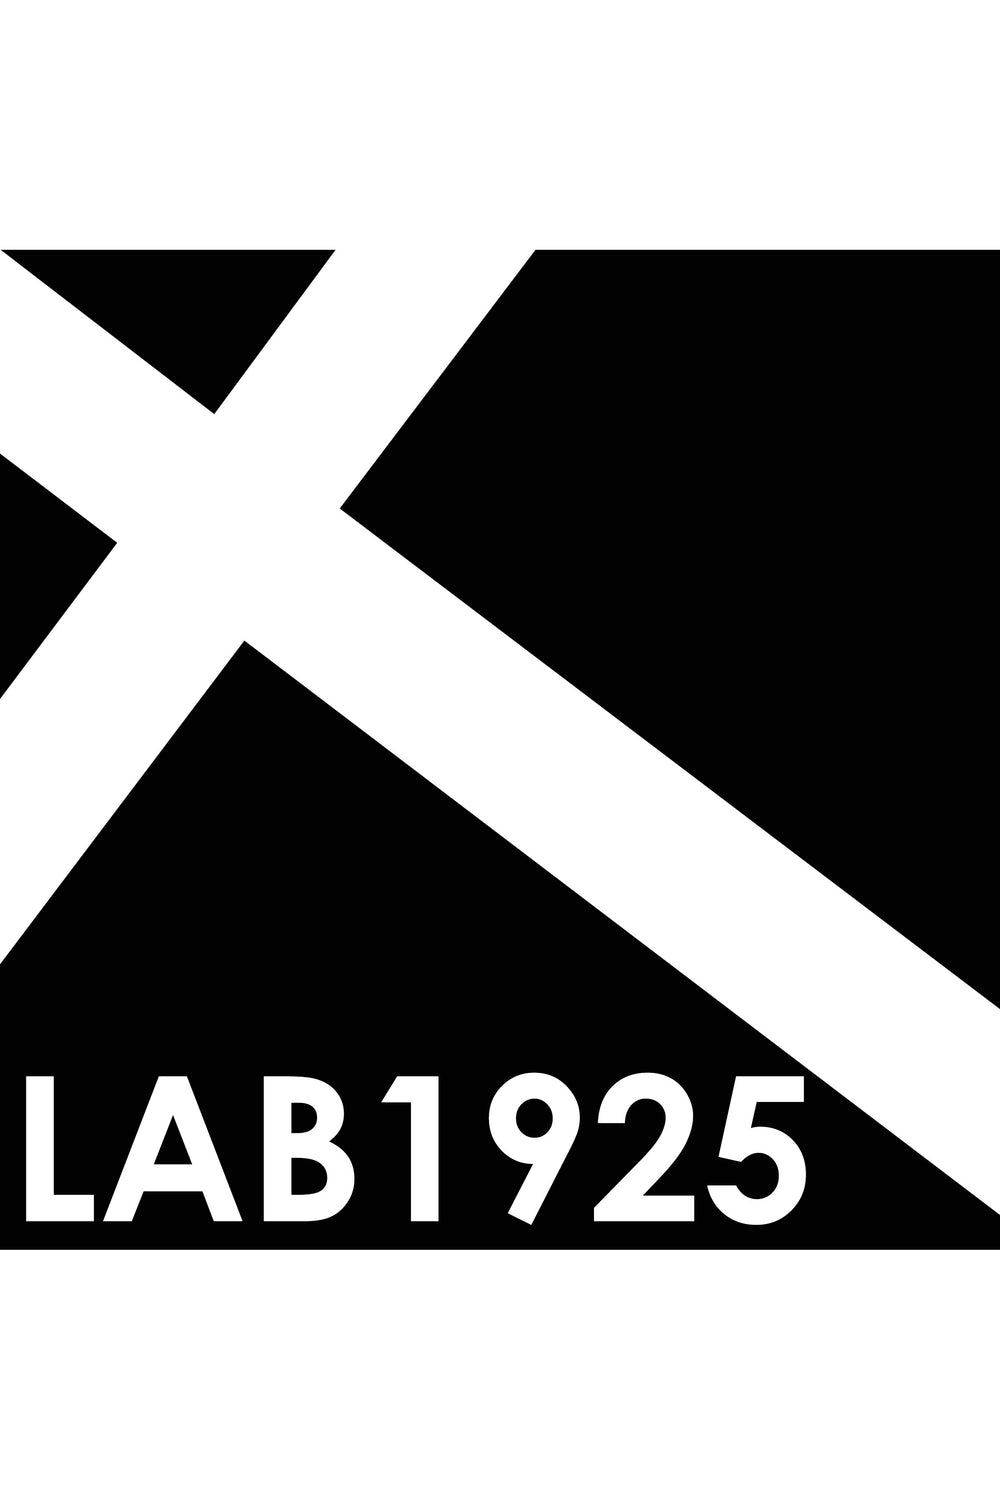 LAB1925 GIFTCARD